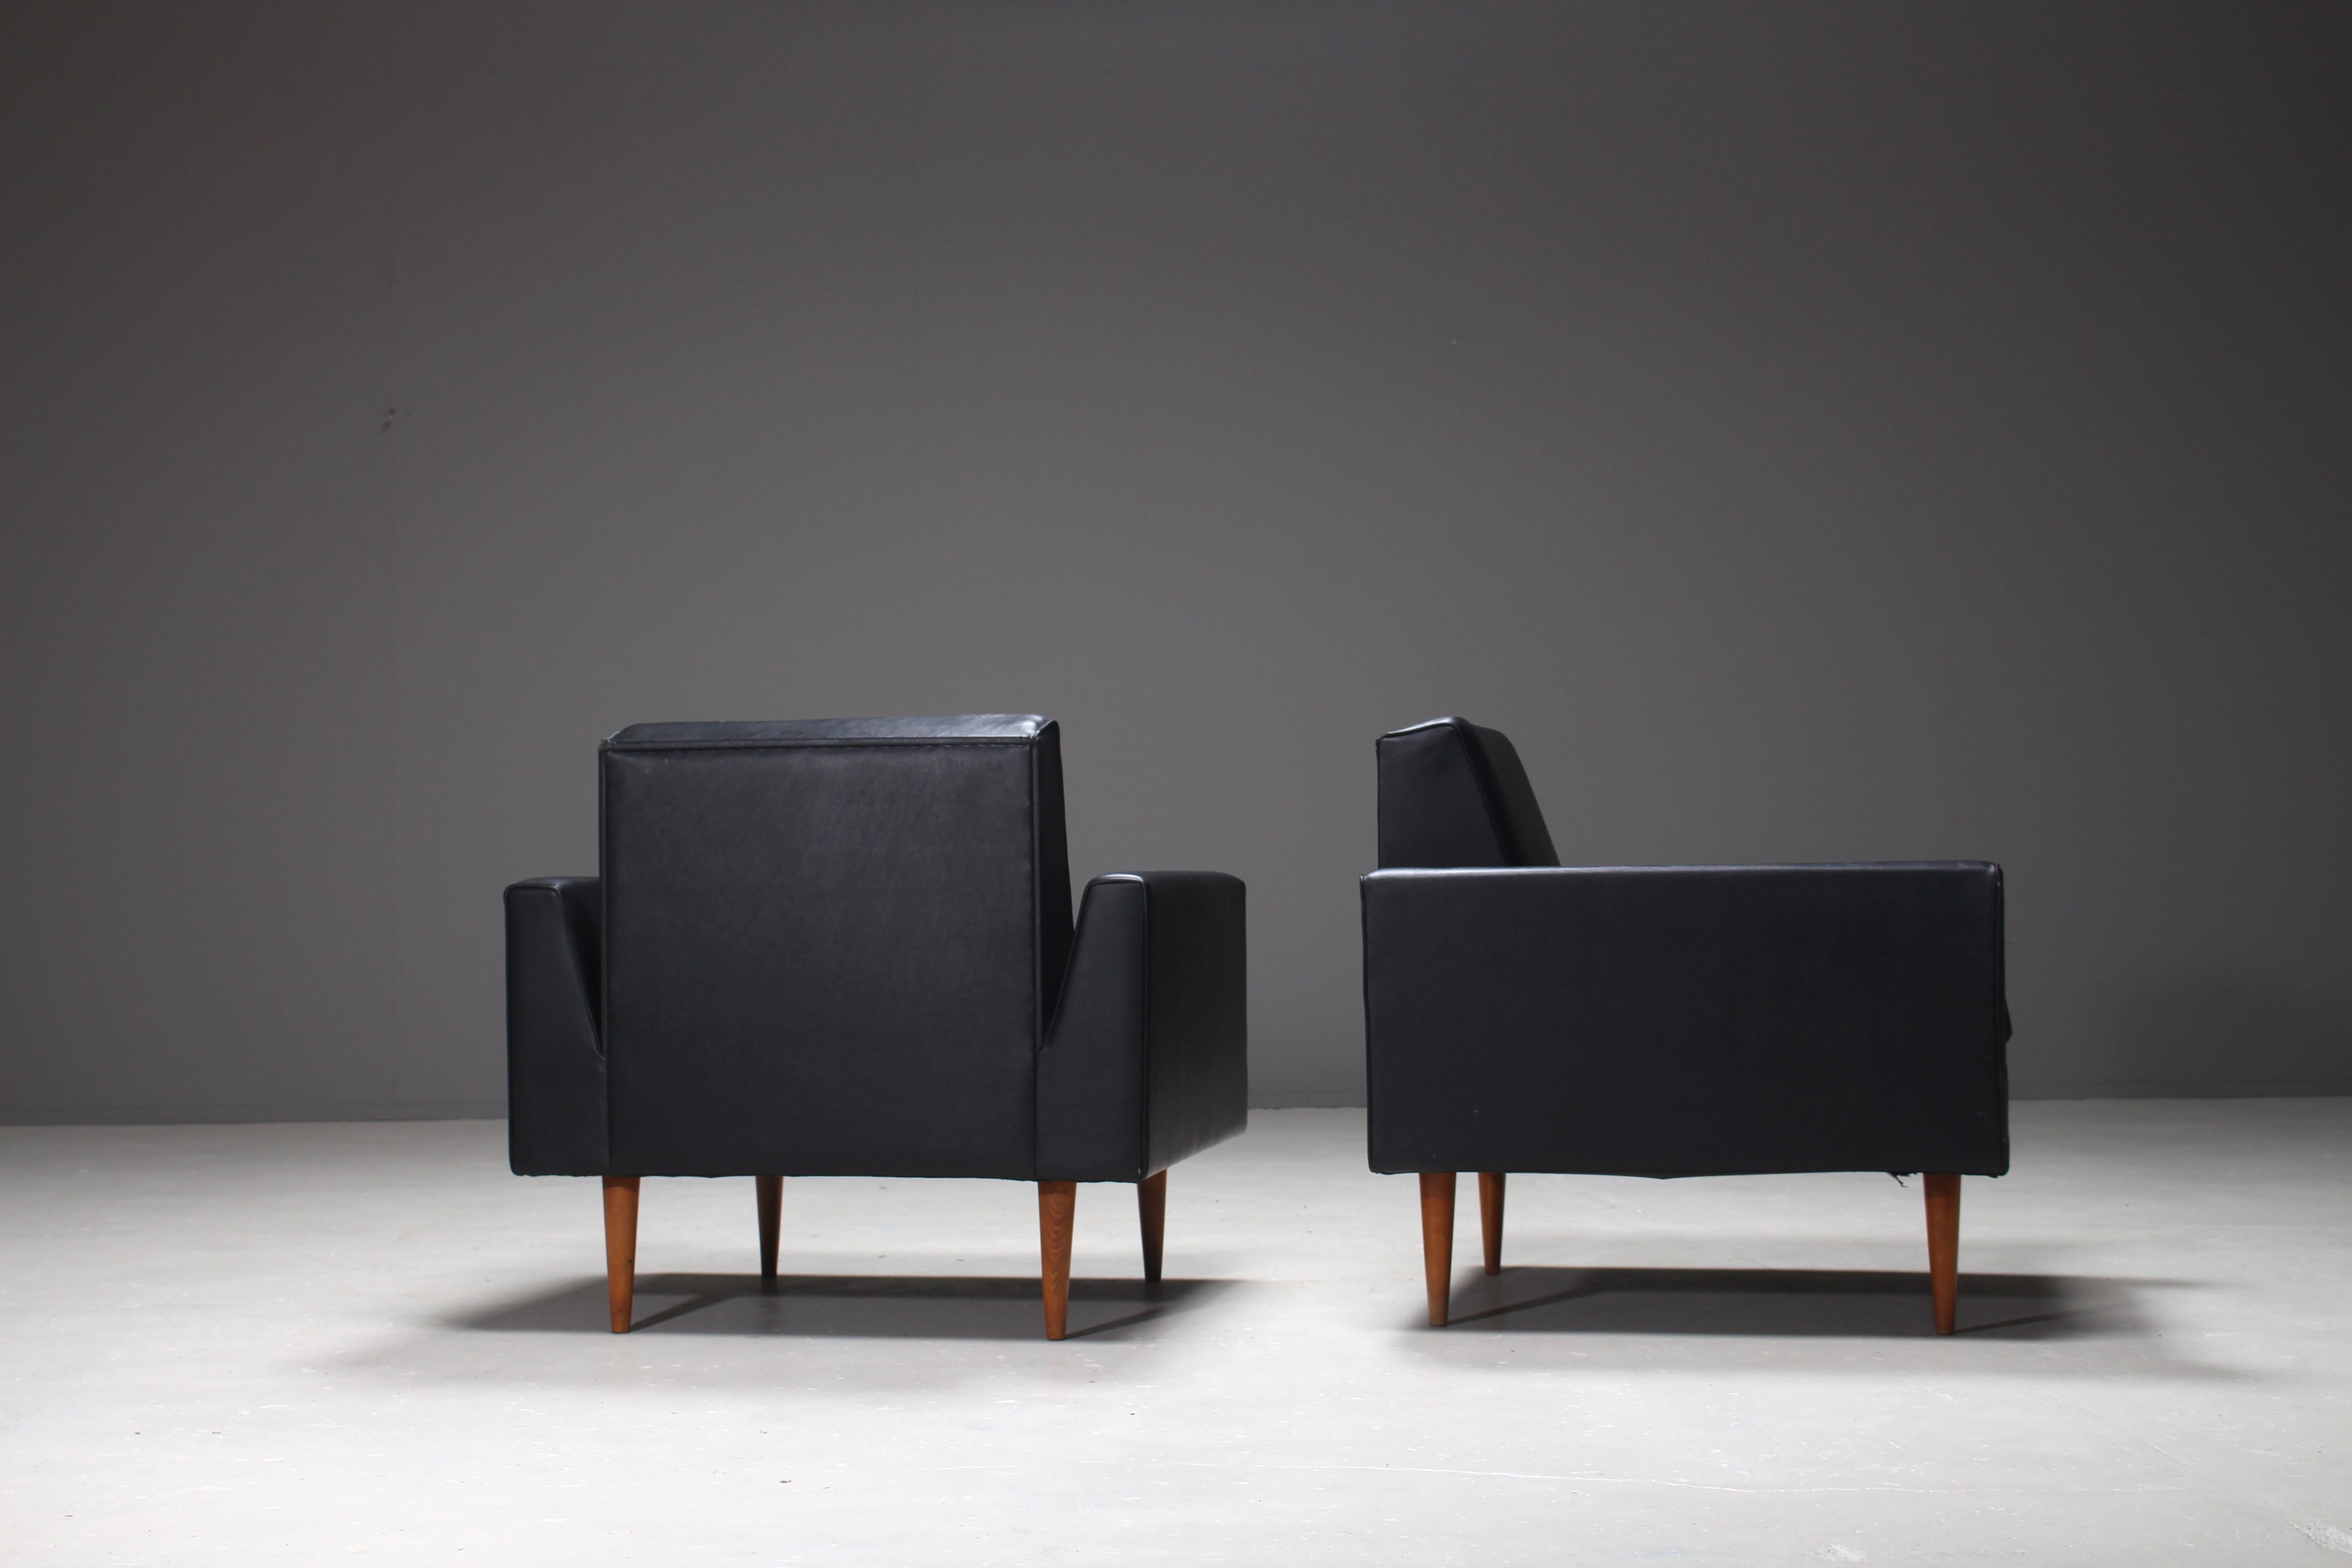 Pair of club chairs designed by Theo Ruth for Artifort in 1955. The chairs are upholstered in the original Artifort black leatherette. This is the early edition of the model 410 for Artifort, with the distinctive cone-shaped oak legs. This first